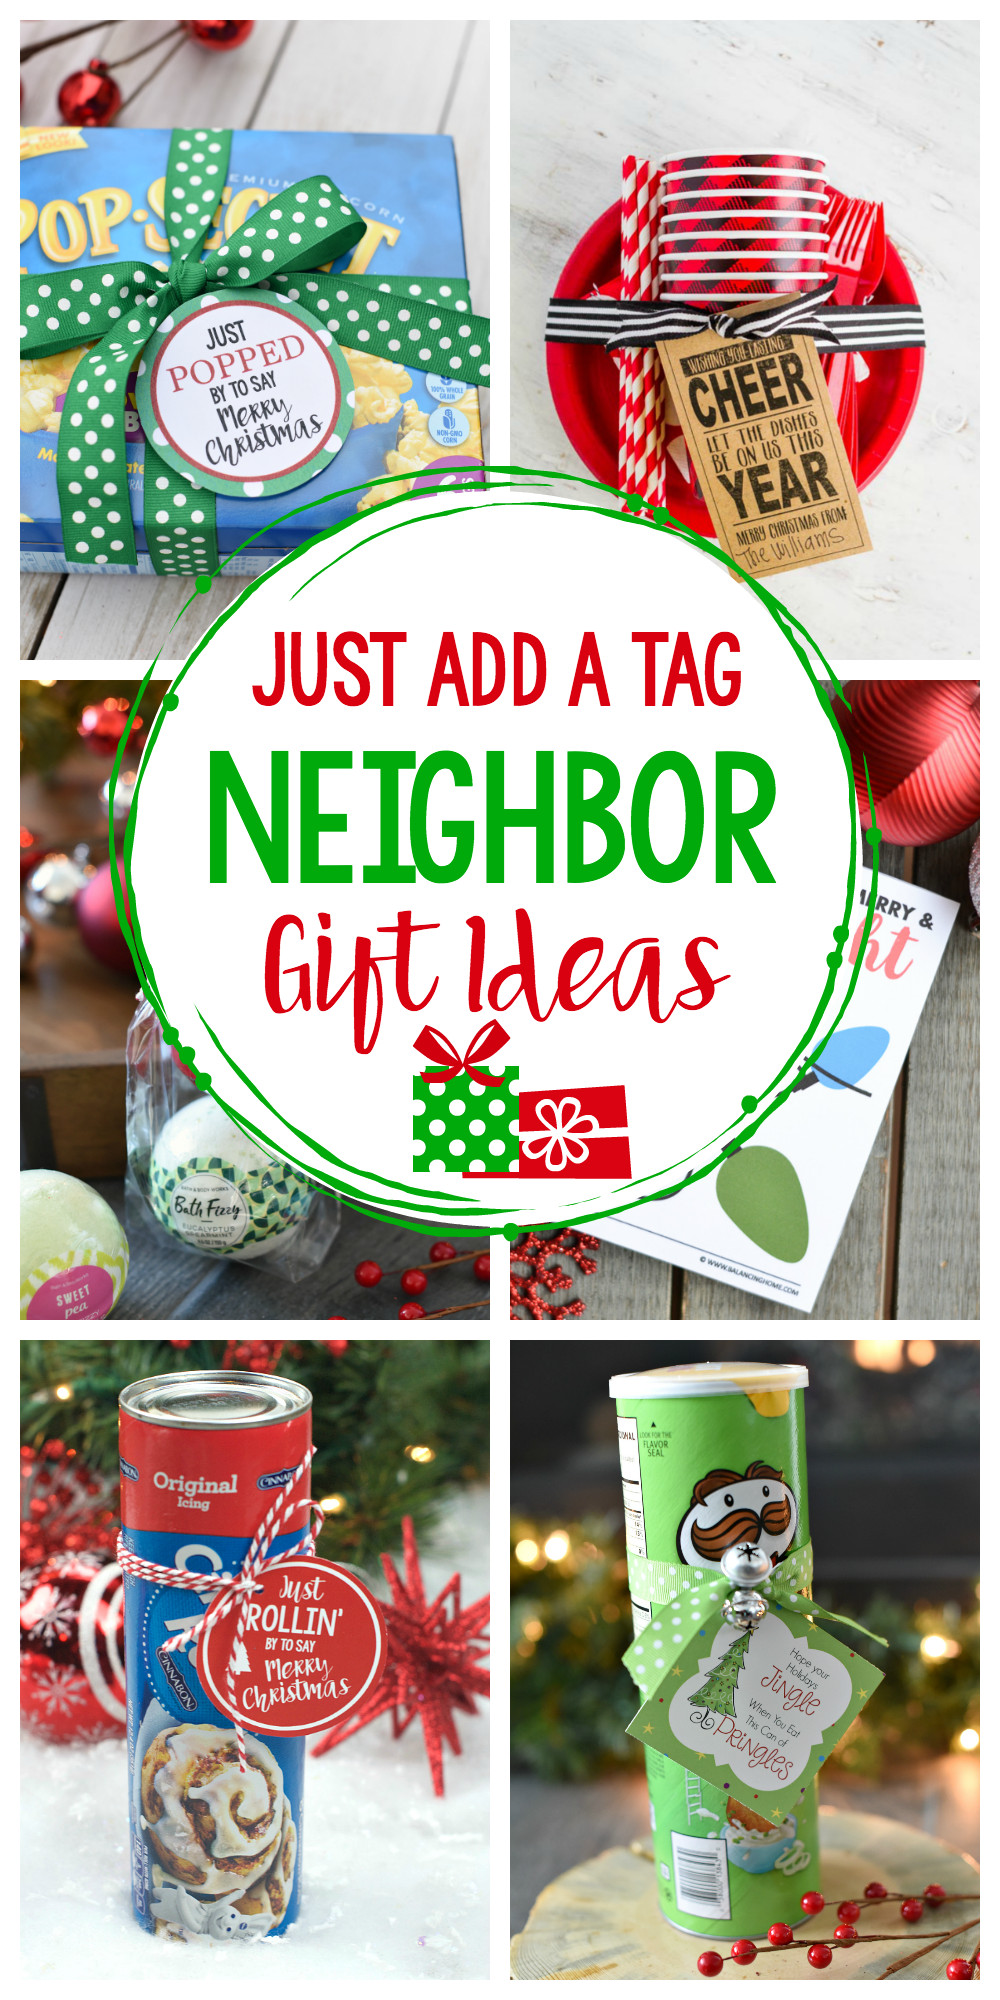 Neighborhood Christmas Gift Ideas
 25 Easy Neighbor Gifts Just Add a Tag Crazy Little Projects